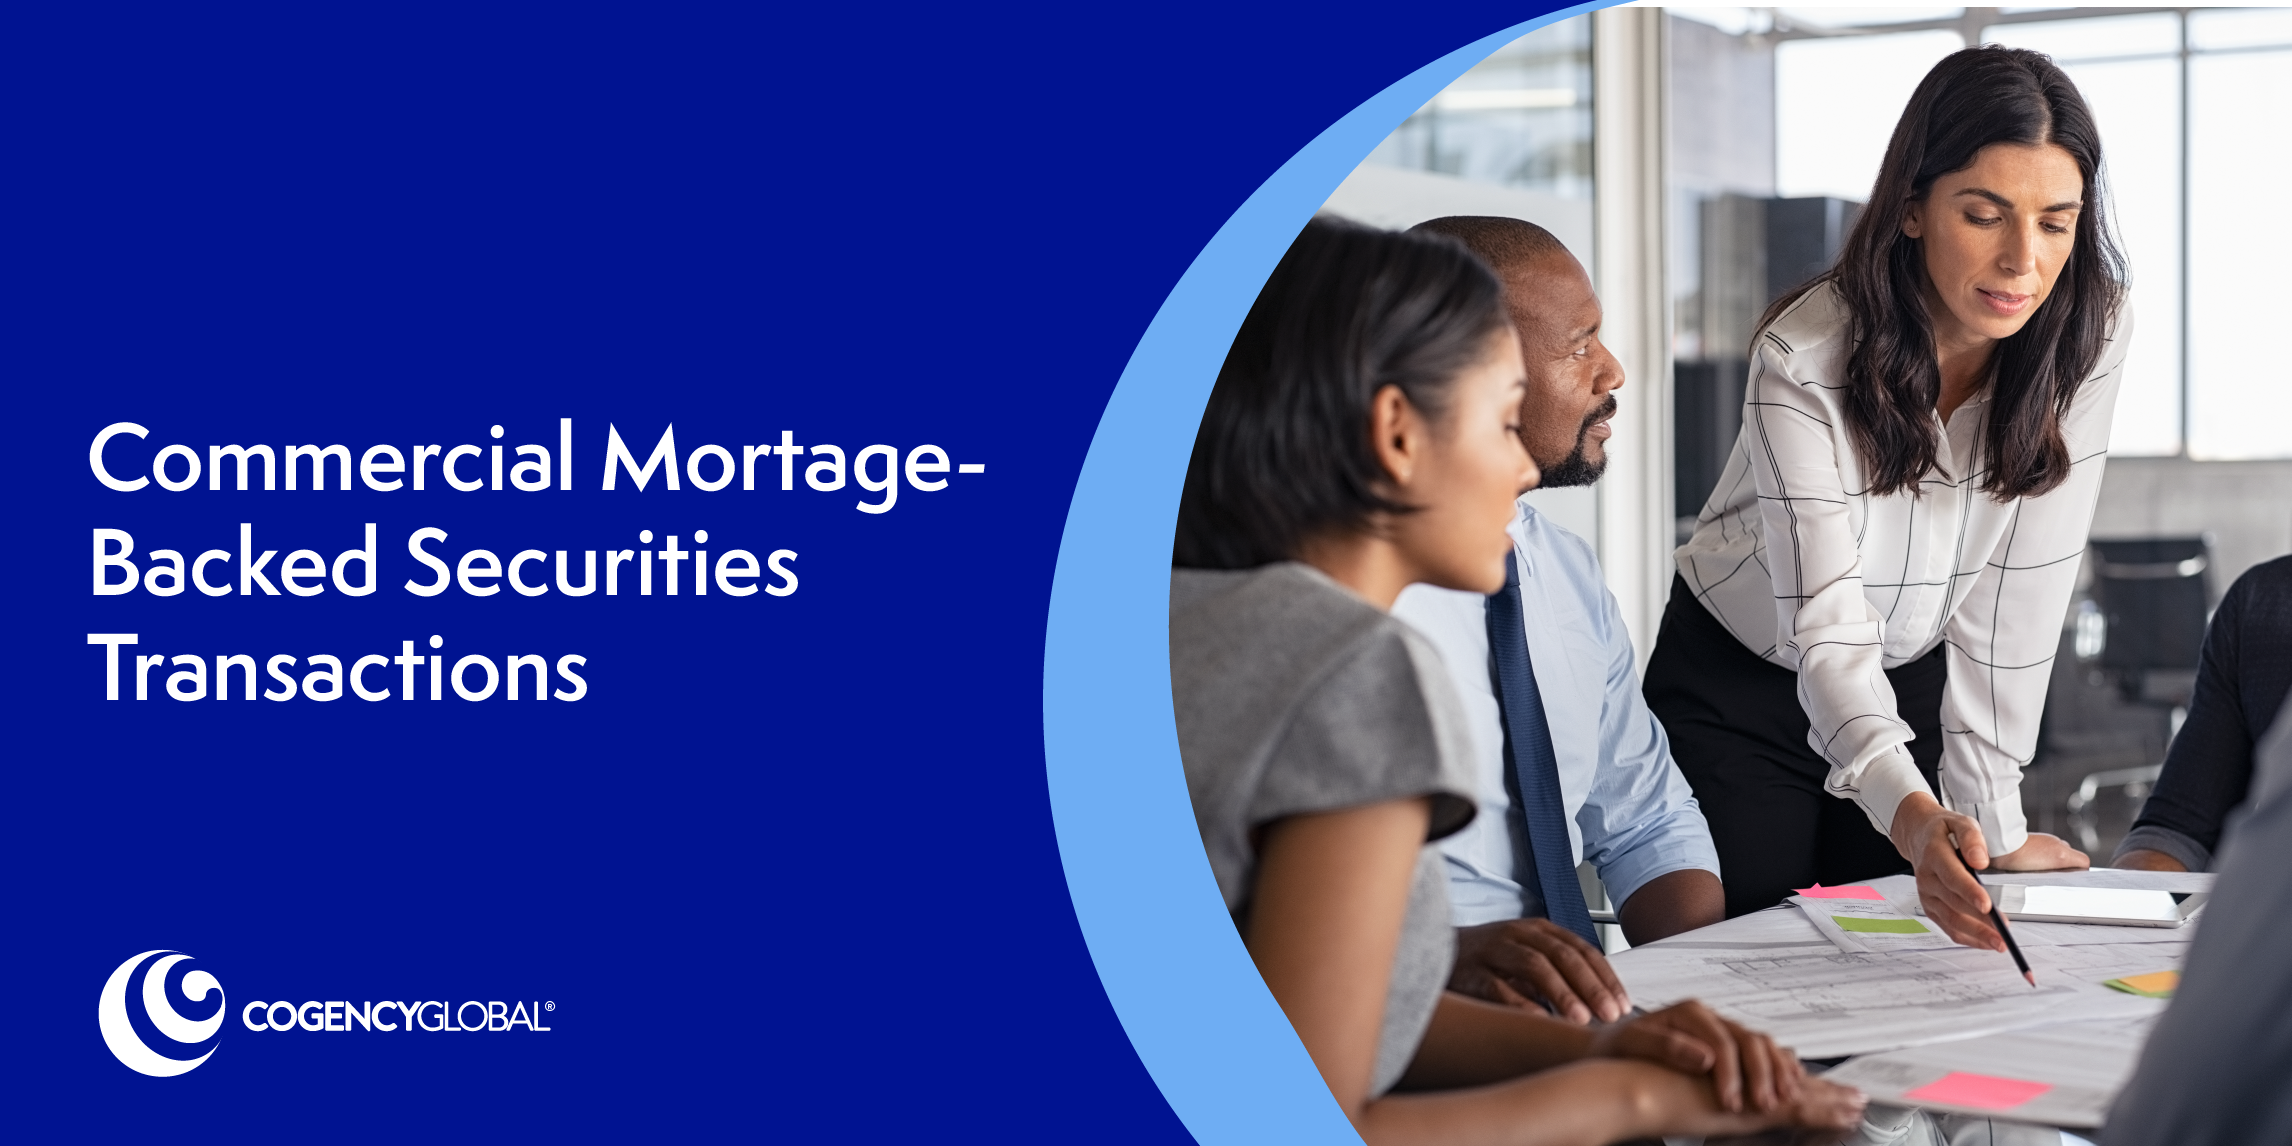 Commercial Mortgage-Backed Securities Transactions